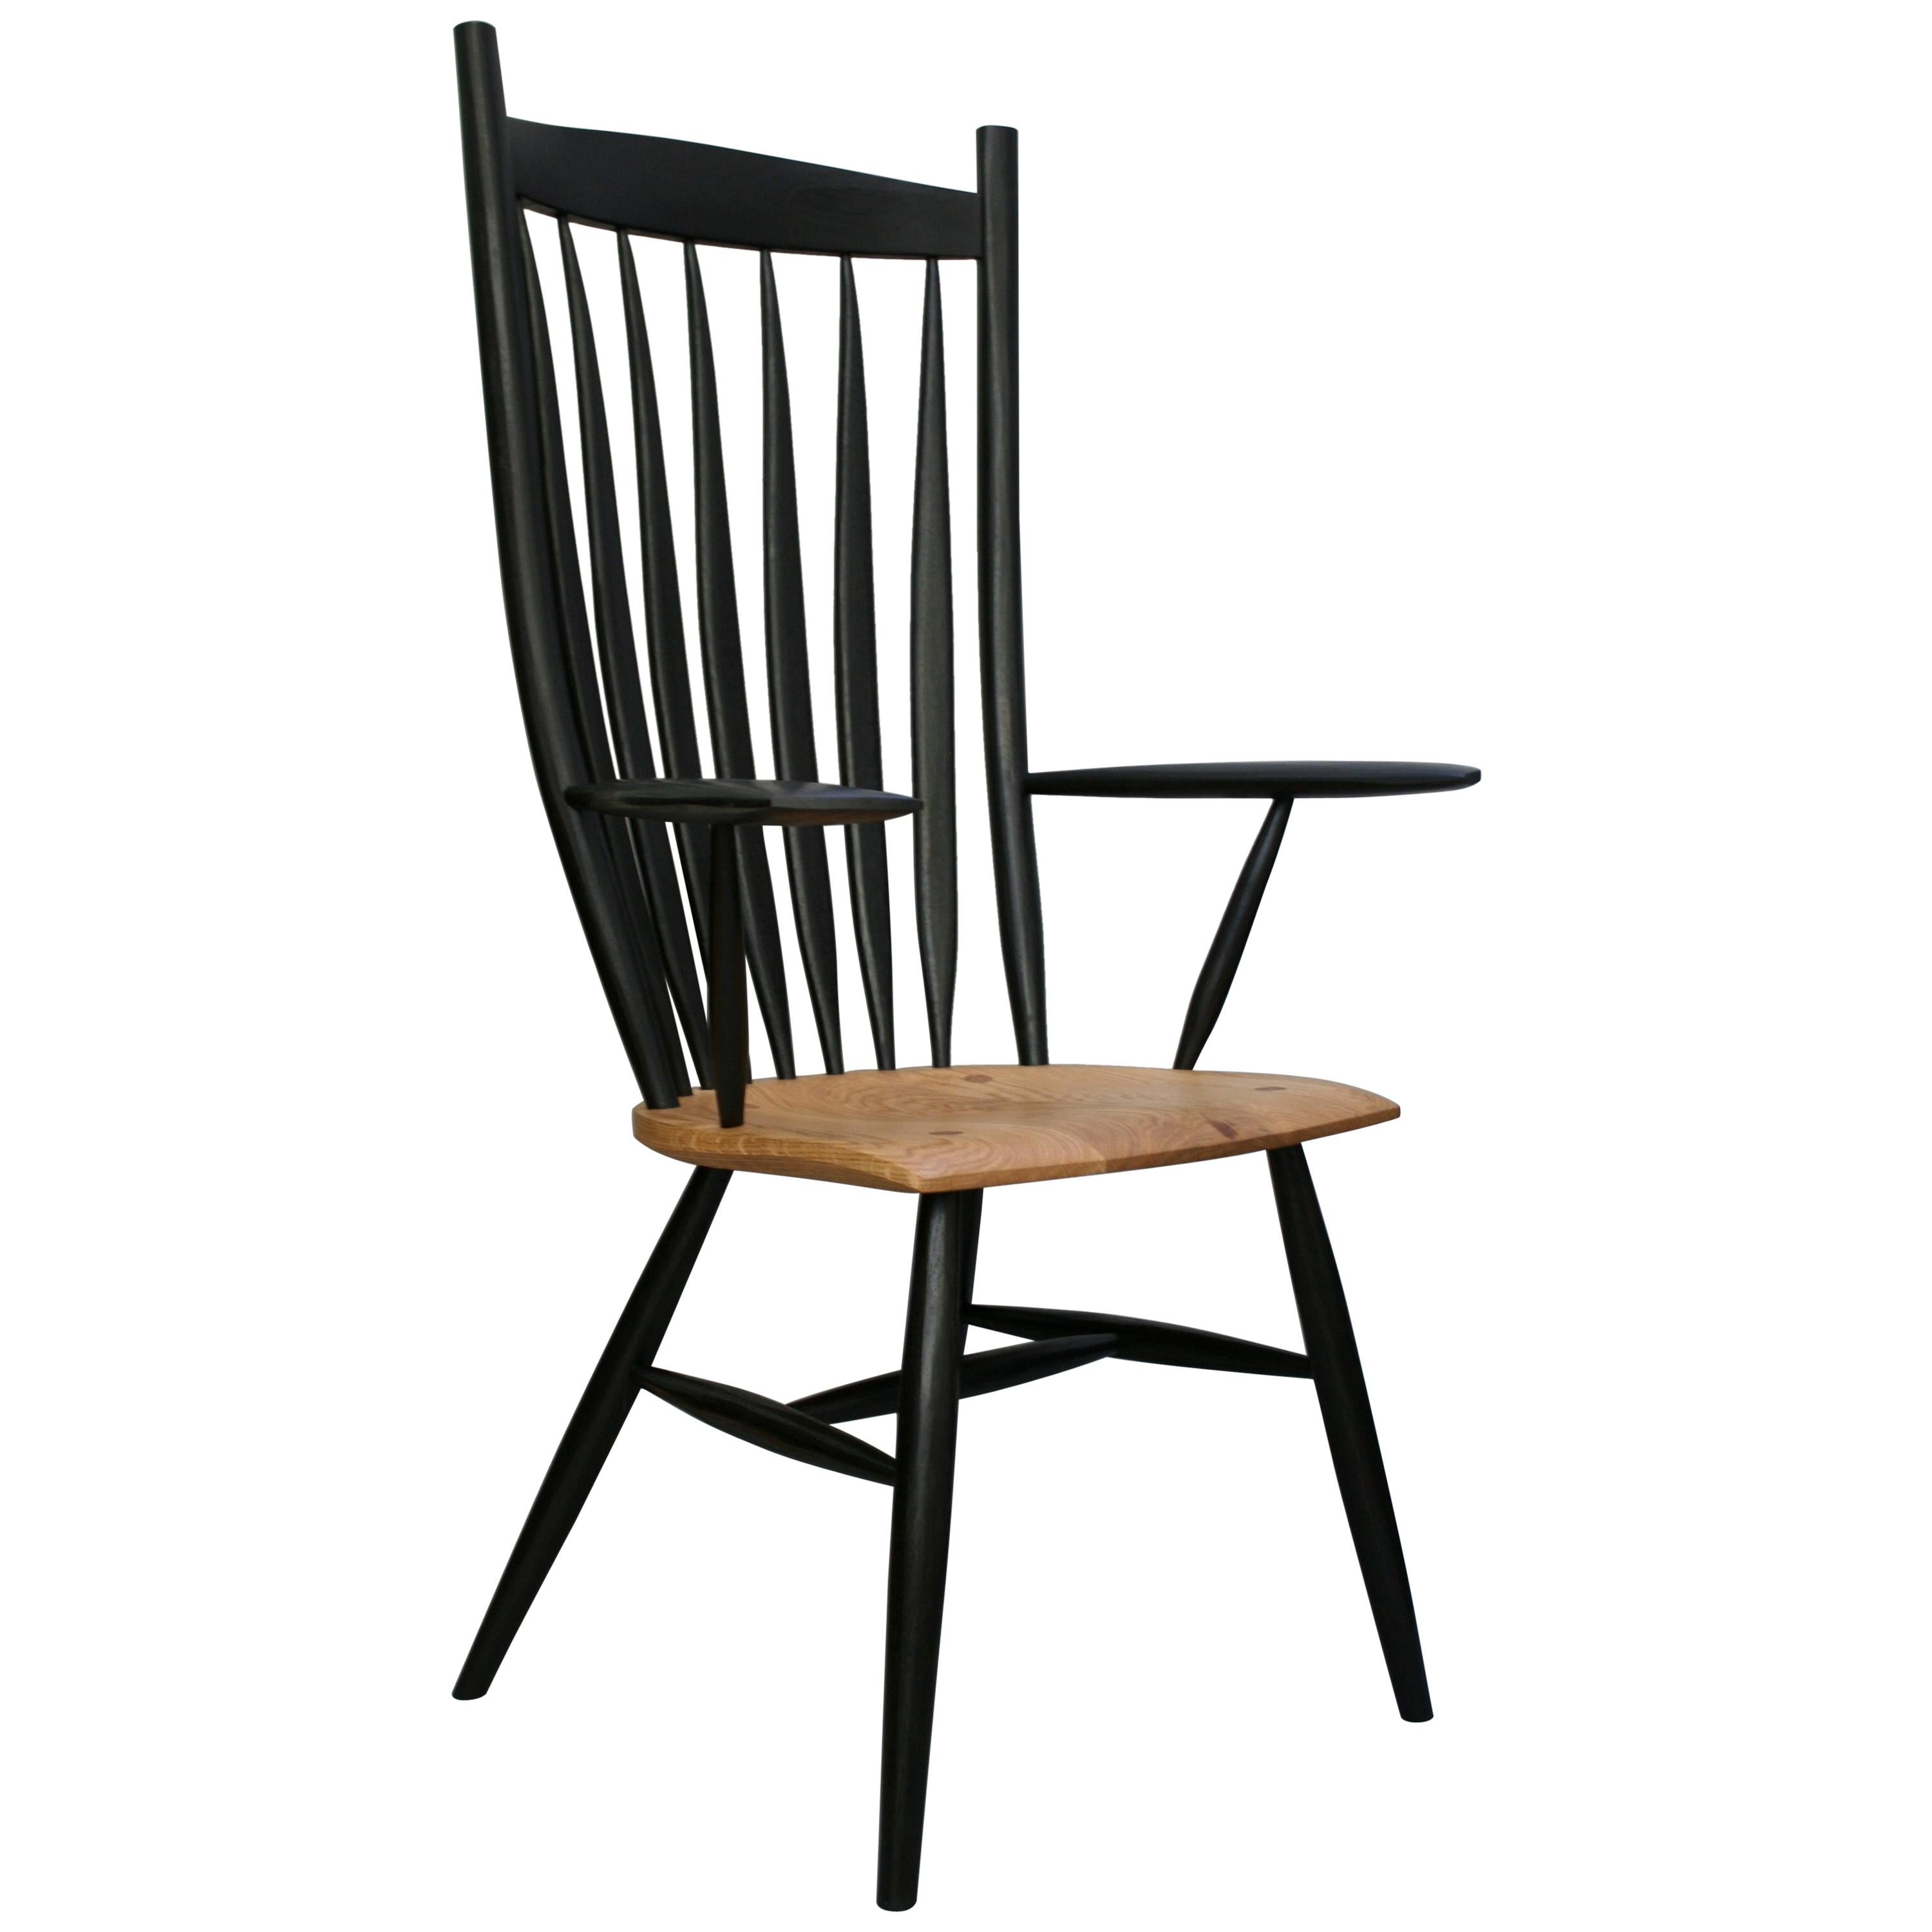 Made to order set of 10 bent chairs by German Woodworker Fabian Fischer. (2 arm and 8 side chairs) Made in the tradition and quality of American Studio craftsmanship. The price reflects the chair made in oak but can also be made in cherry and walnut